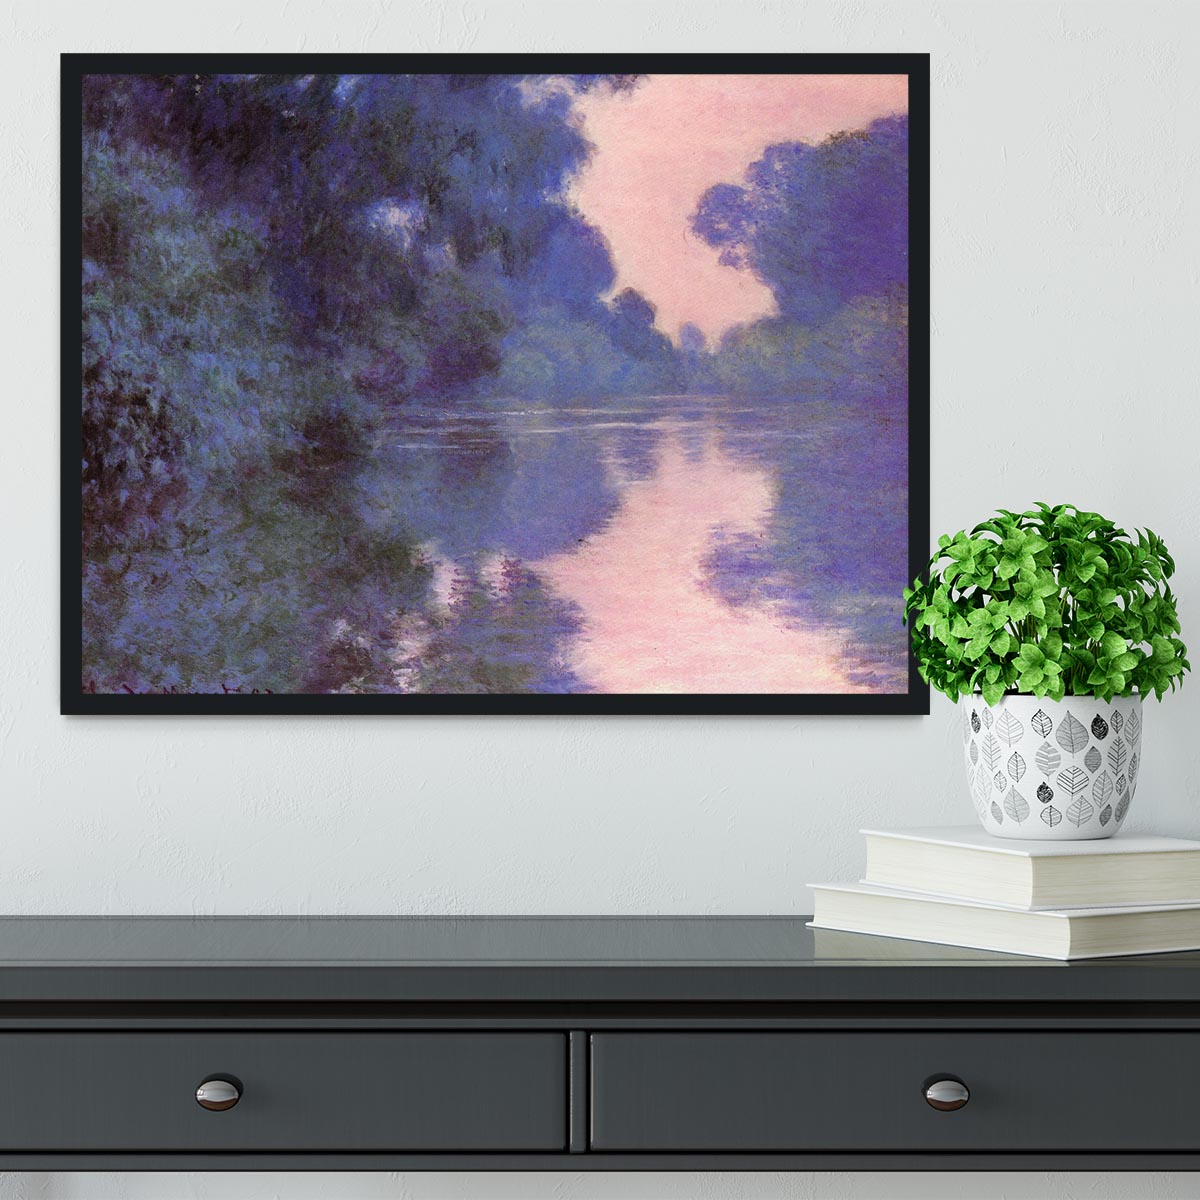 Seine arm at Giverny by Monet Framed Print - Canvas Art Rocks - 2